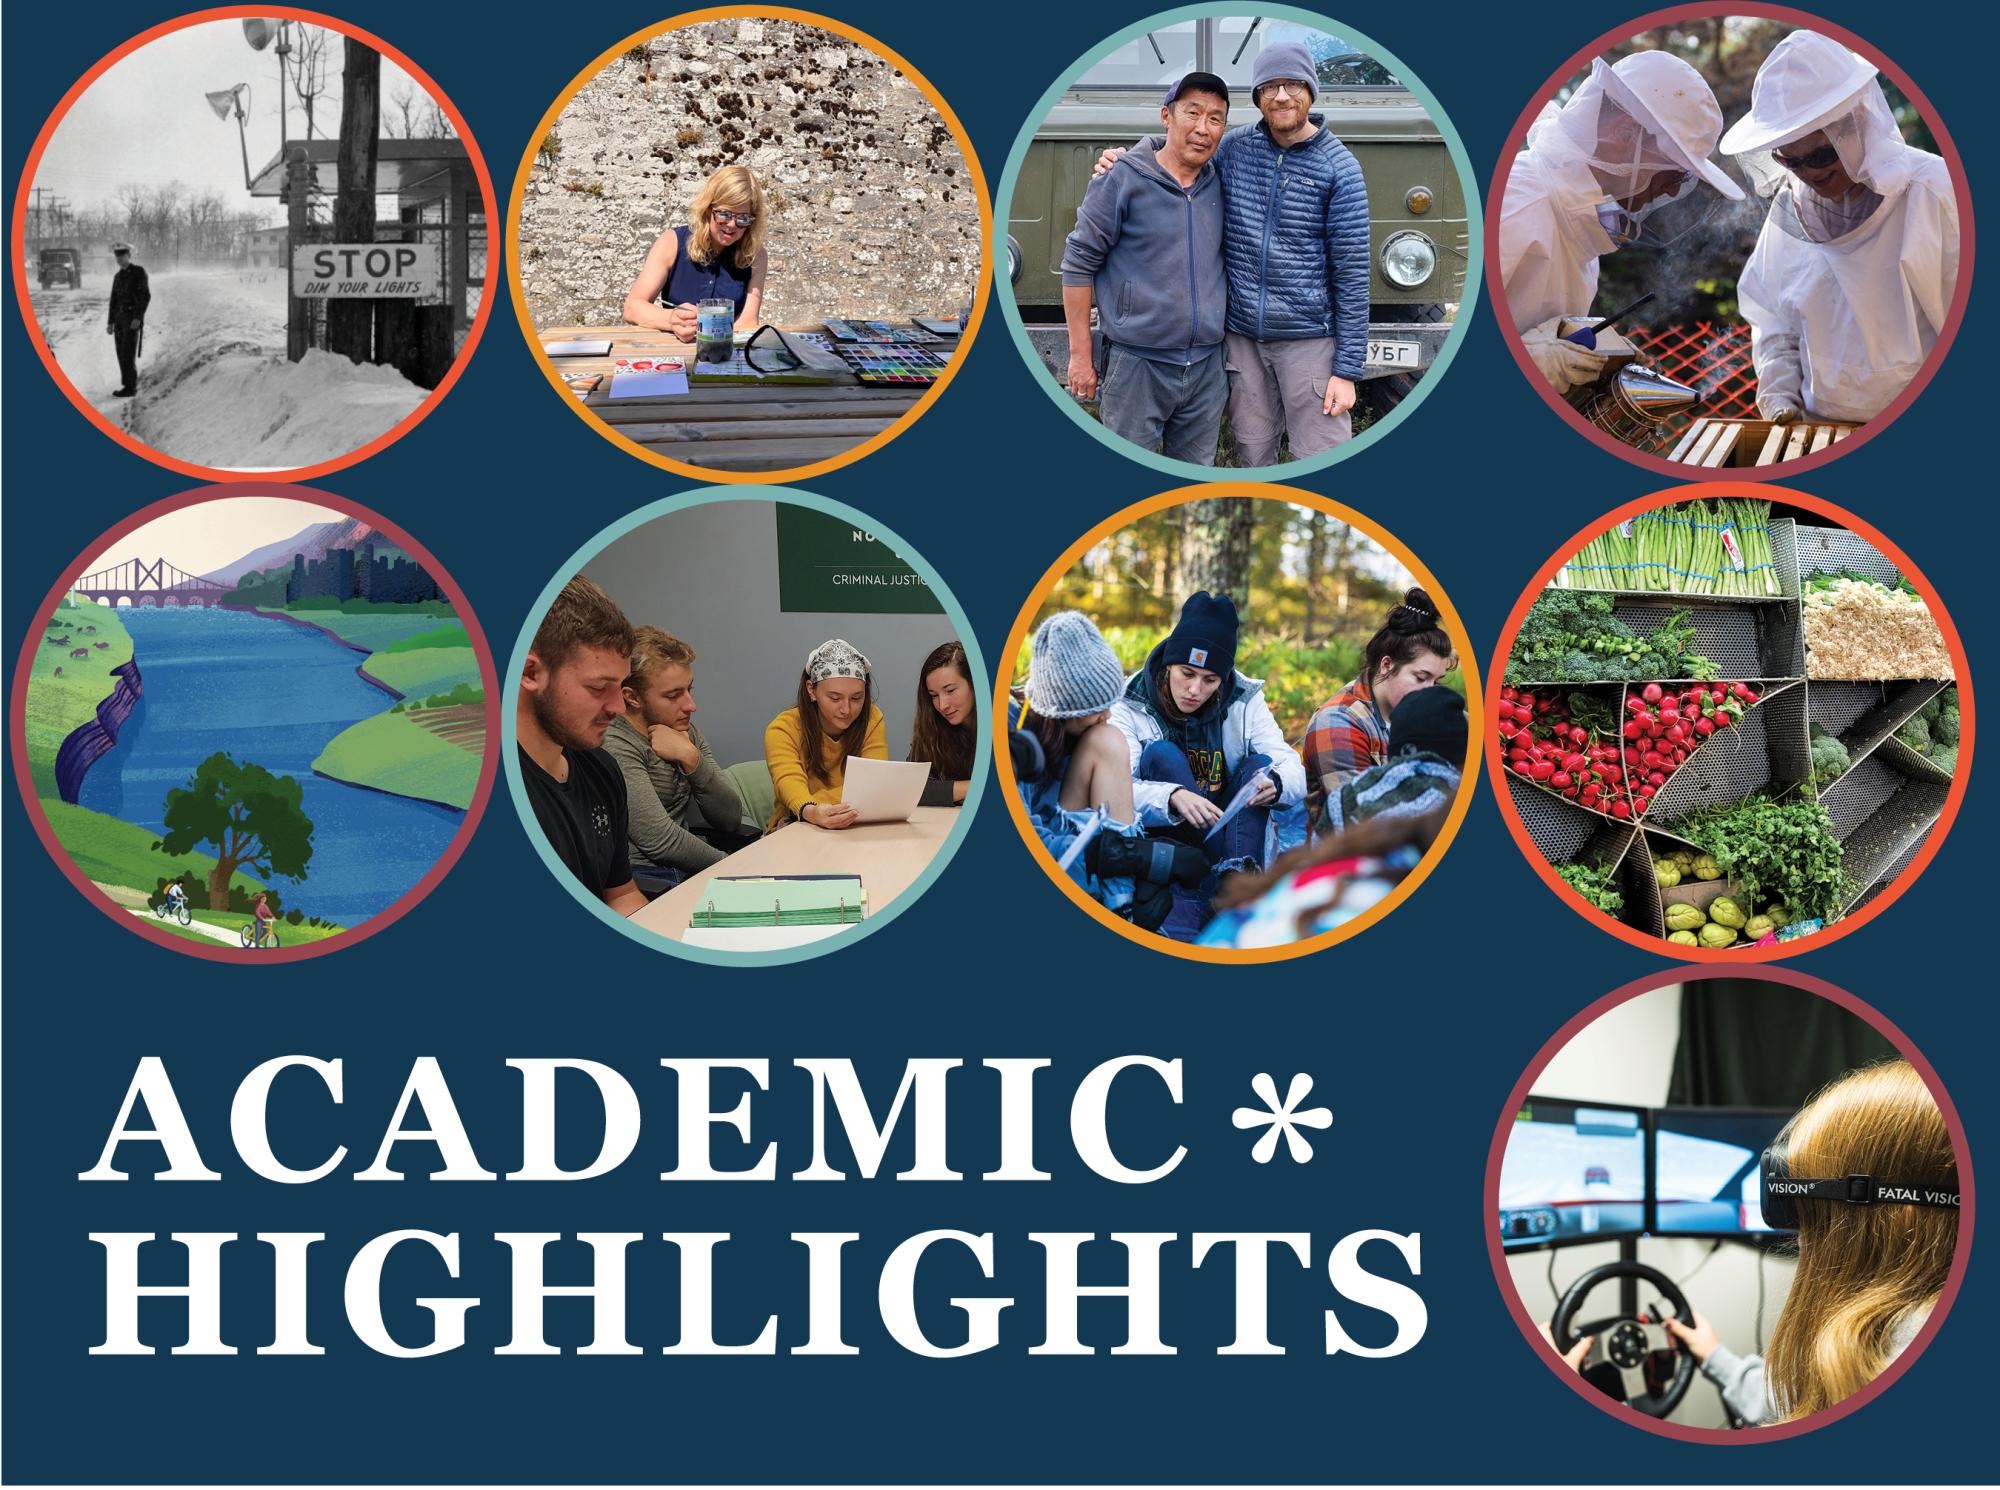 Academic Highlights text with photos depicting students in action in various study areas